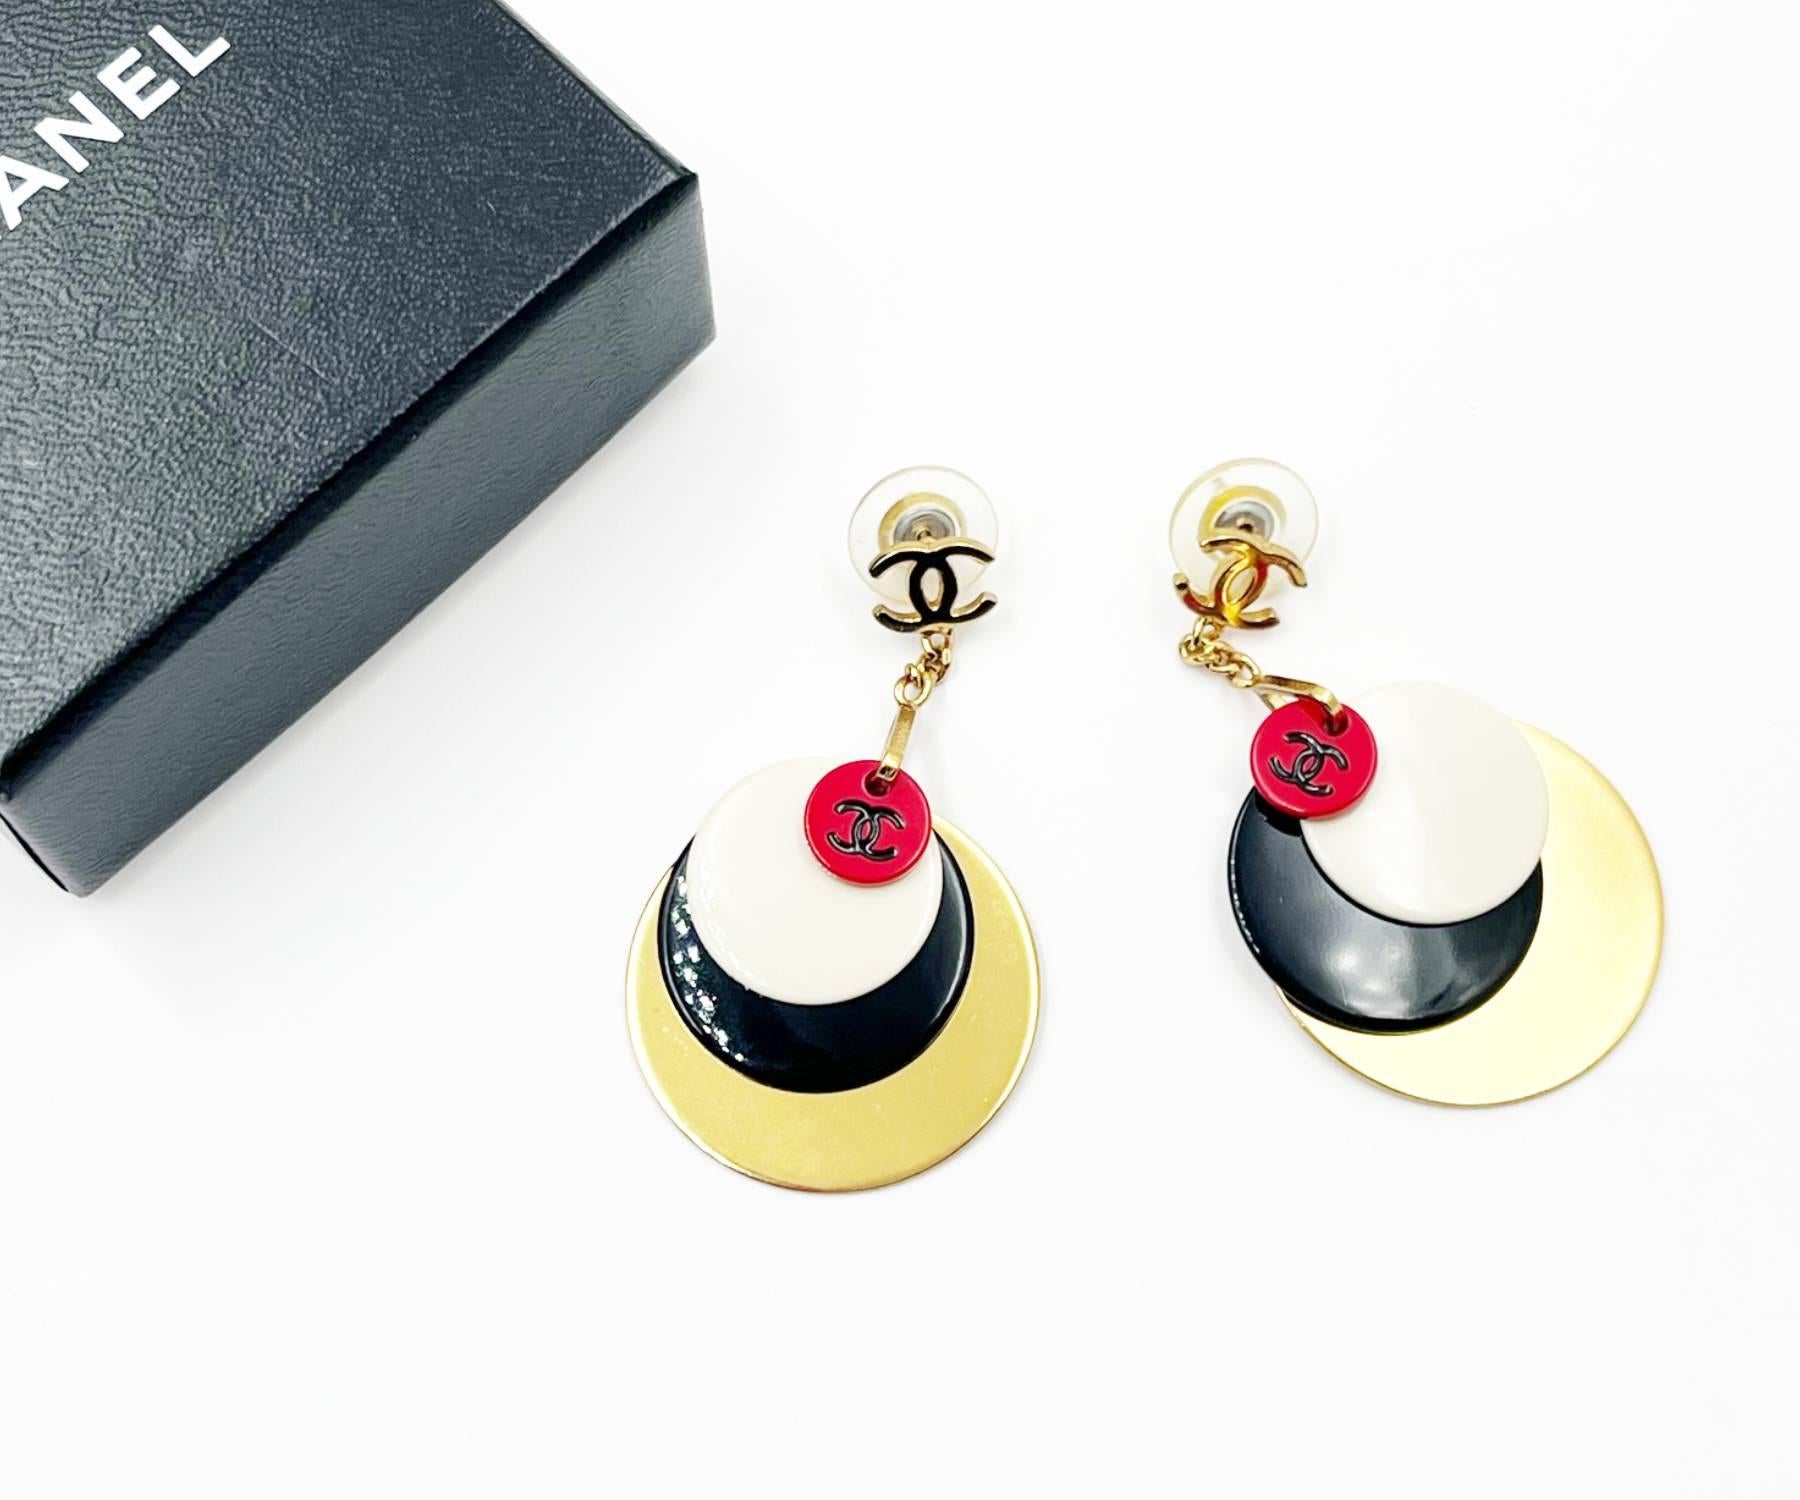 Chanel Rare Gold CC Red White Black Gold Disc Dangle Piercing Earrings

* Marked 01
* Made in France
* Comes with the original box

-It is approximately 1.25